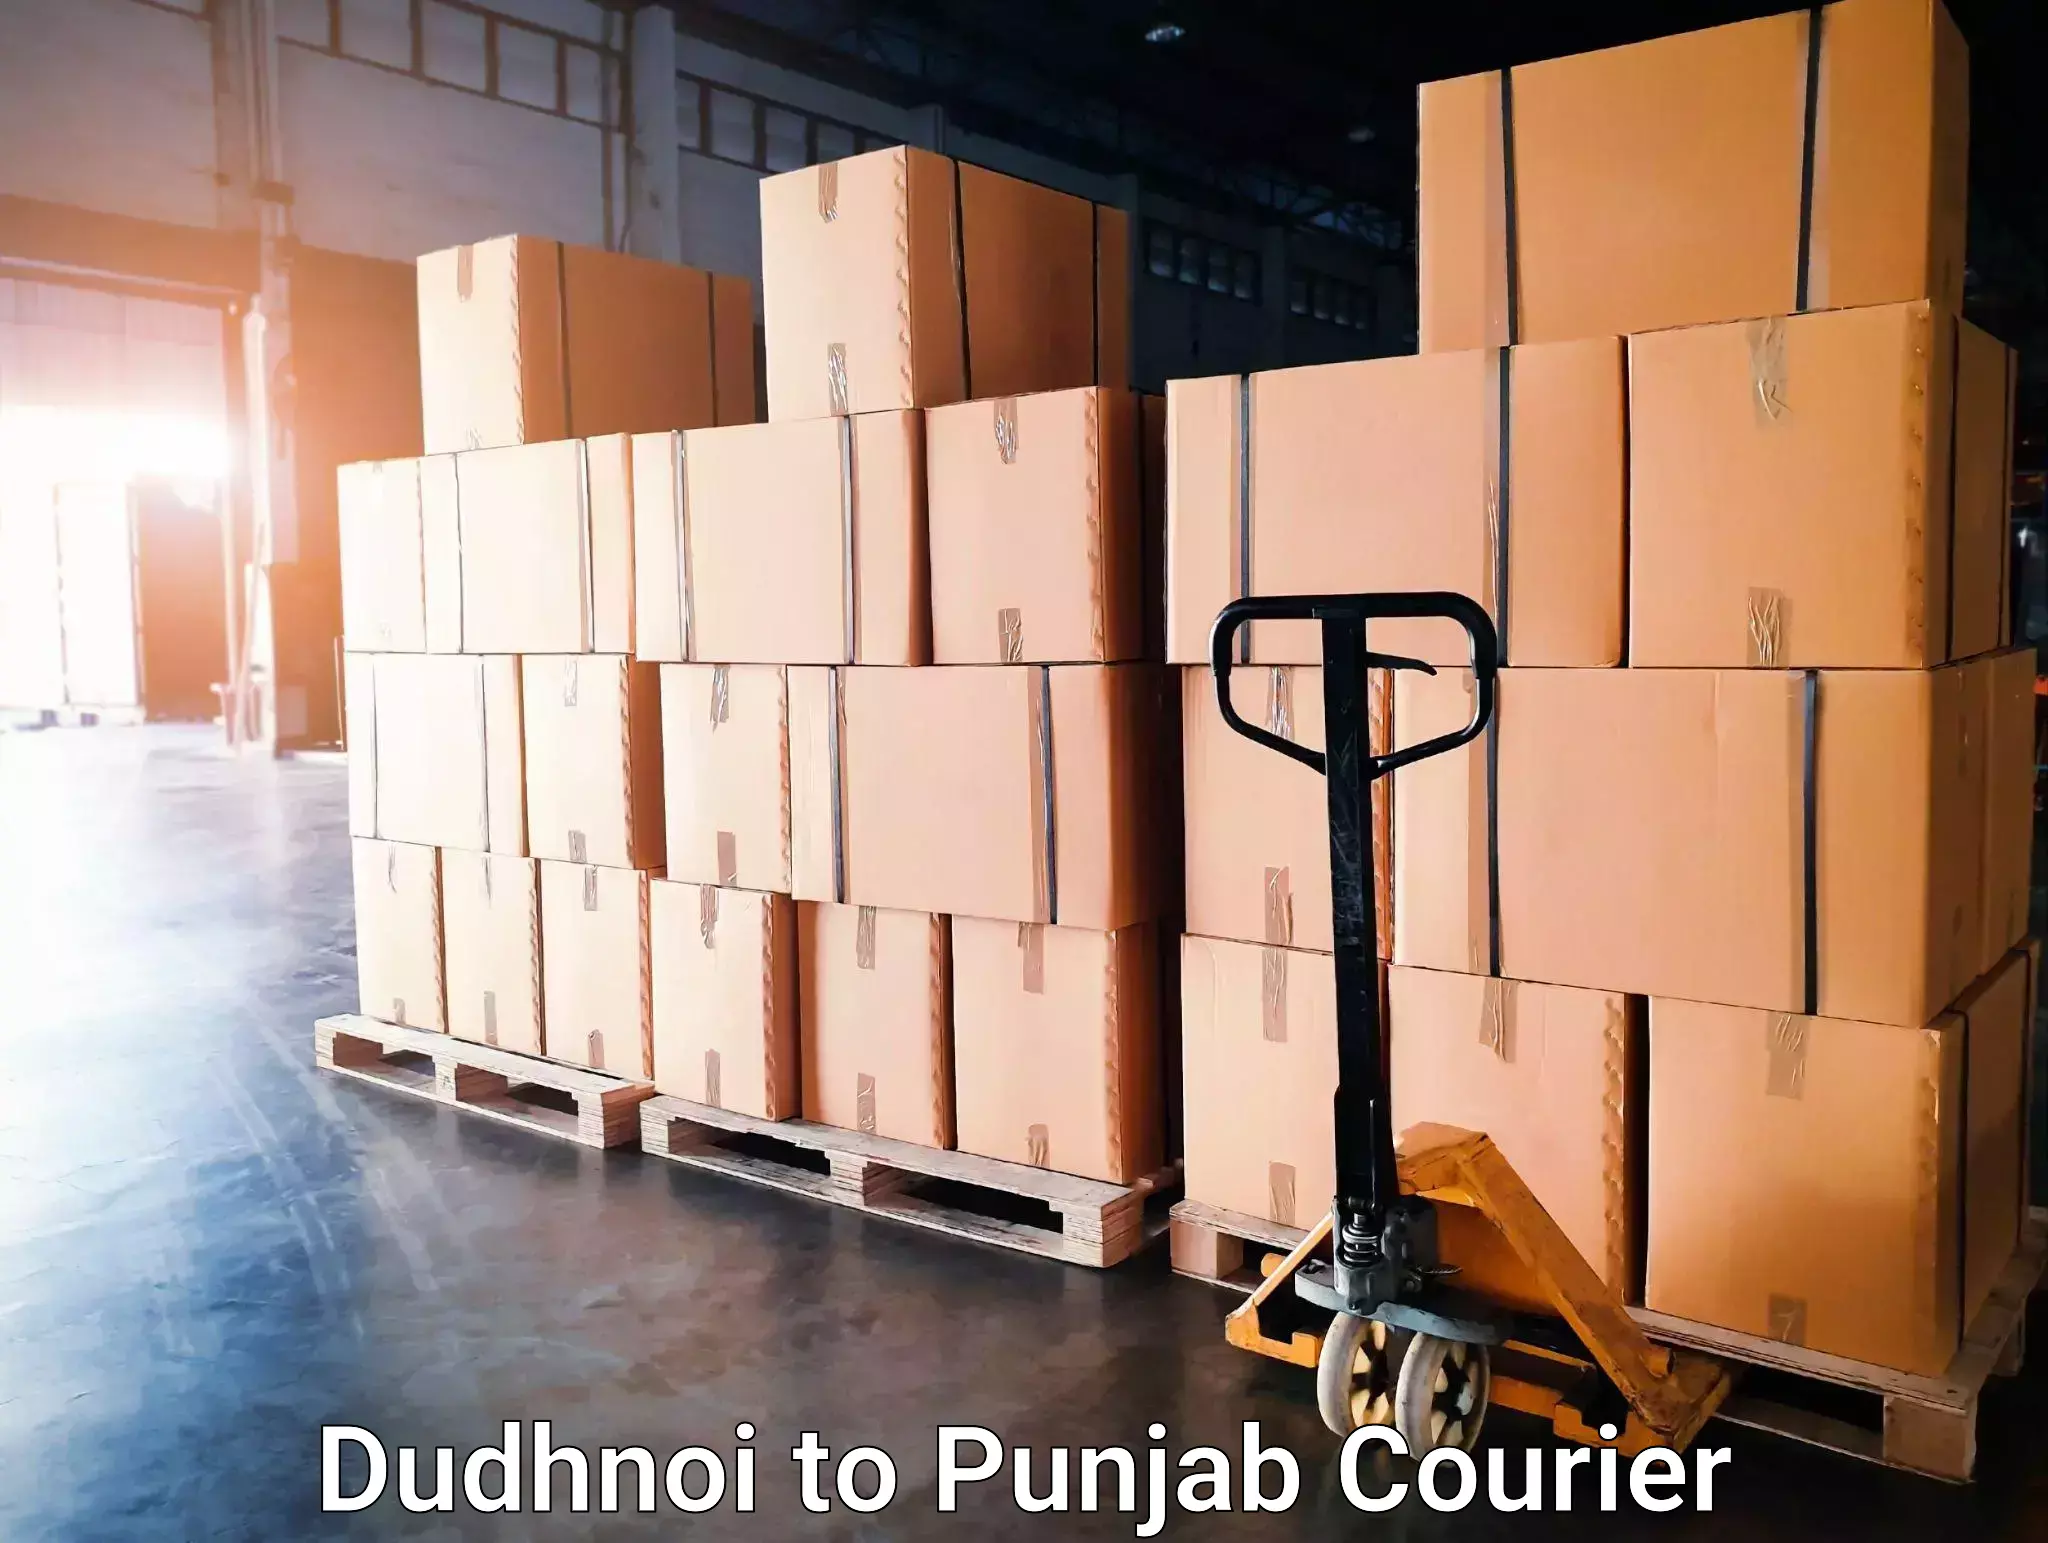 High-priority parcel service Dudhnoi to Punjab